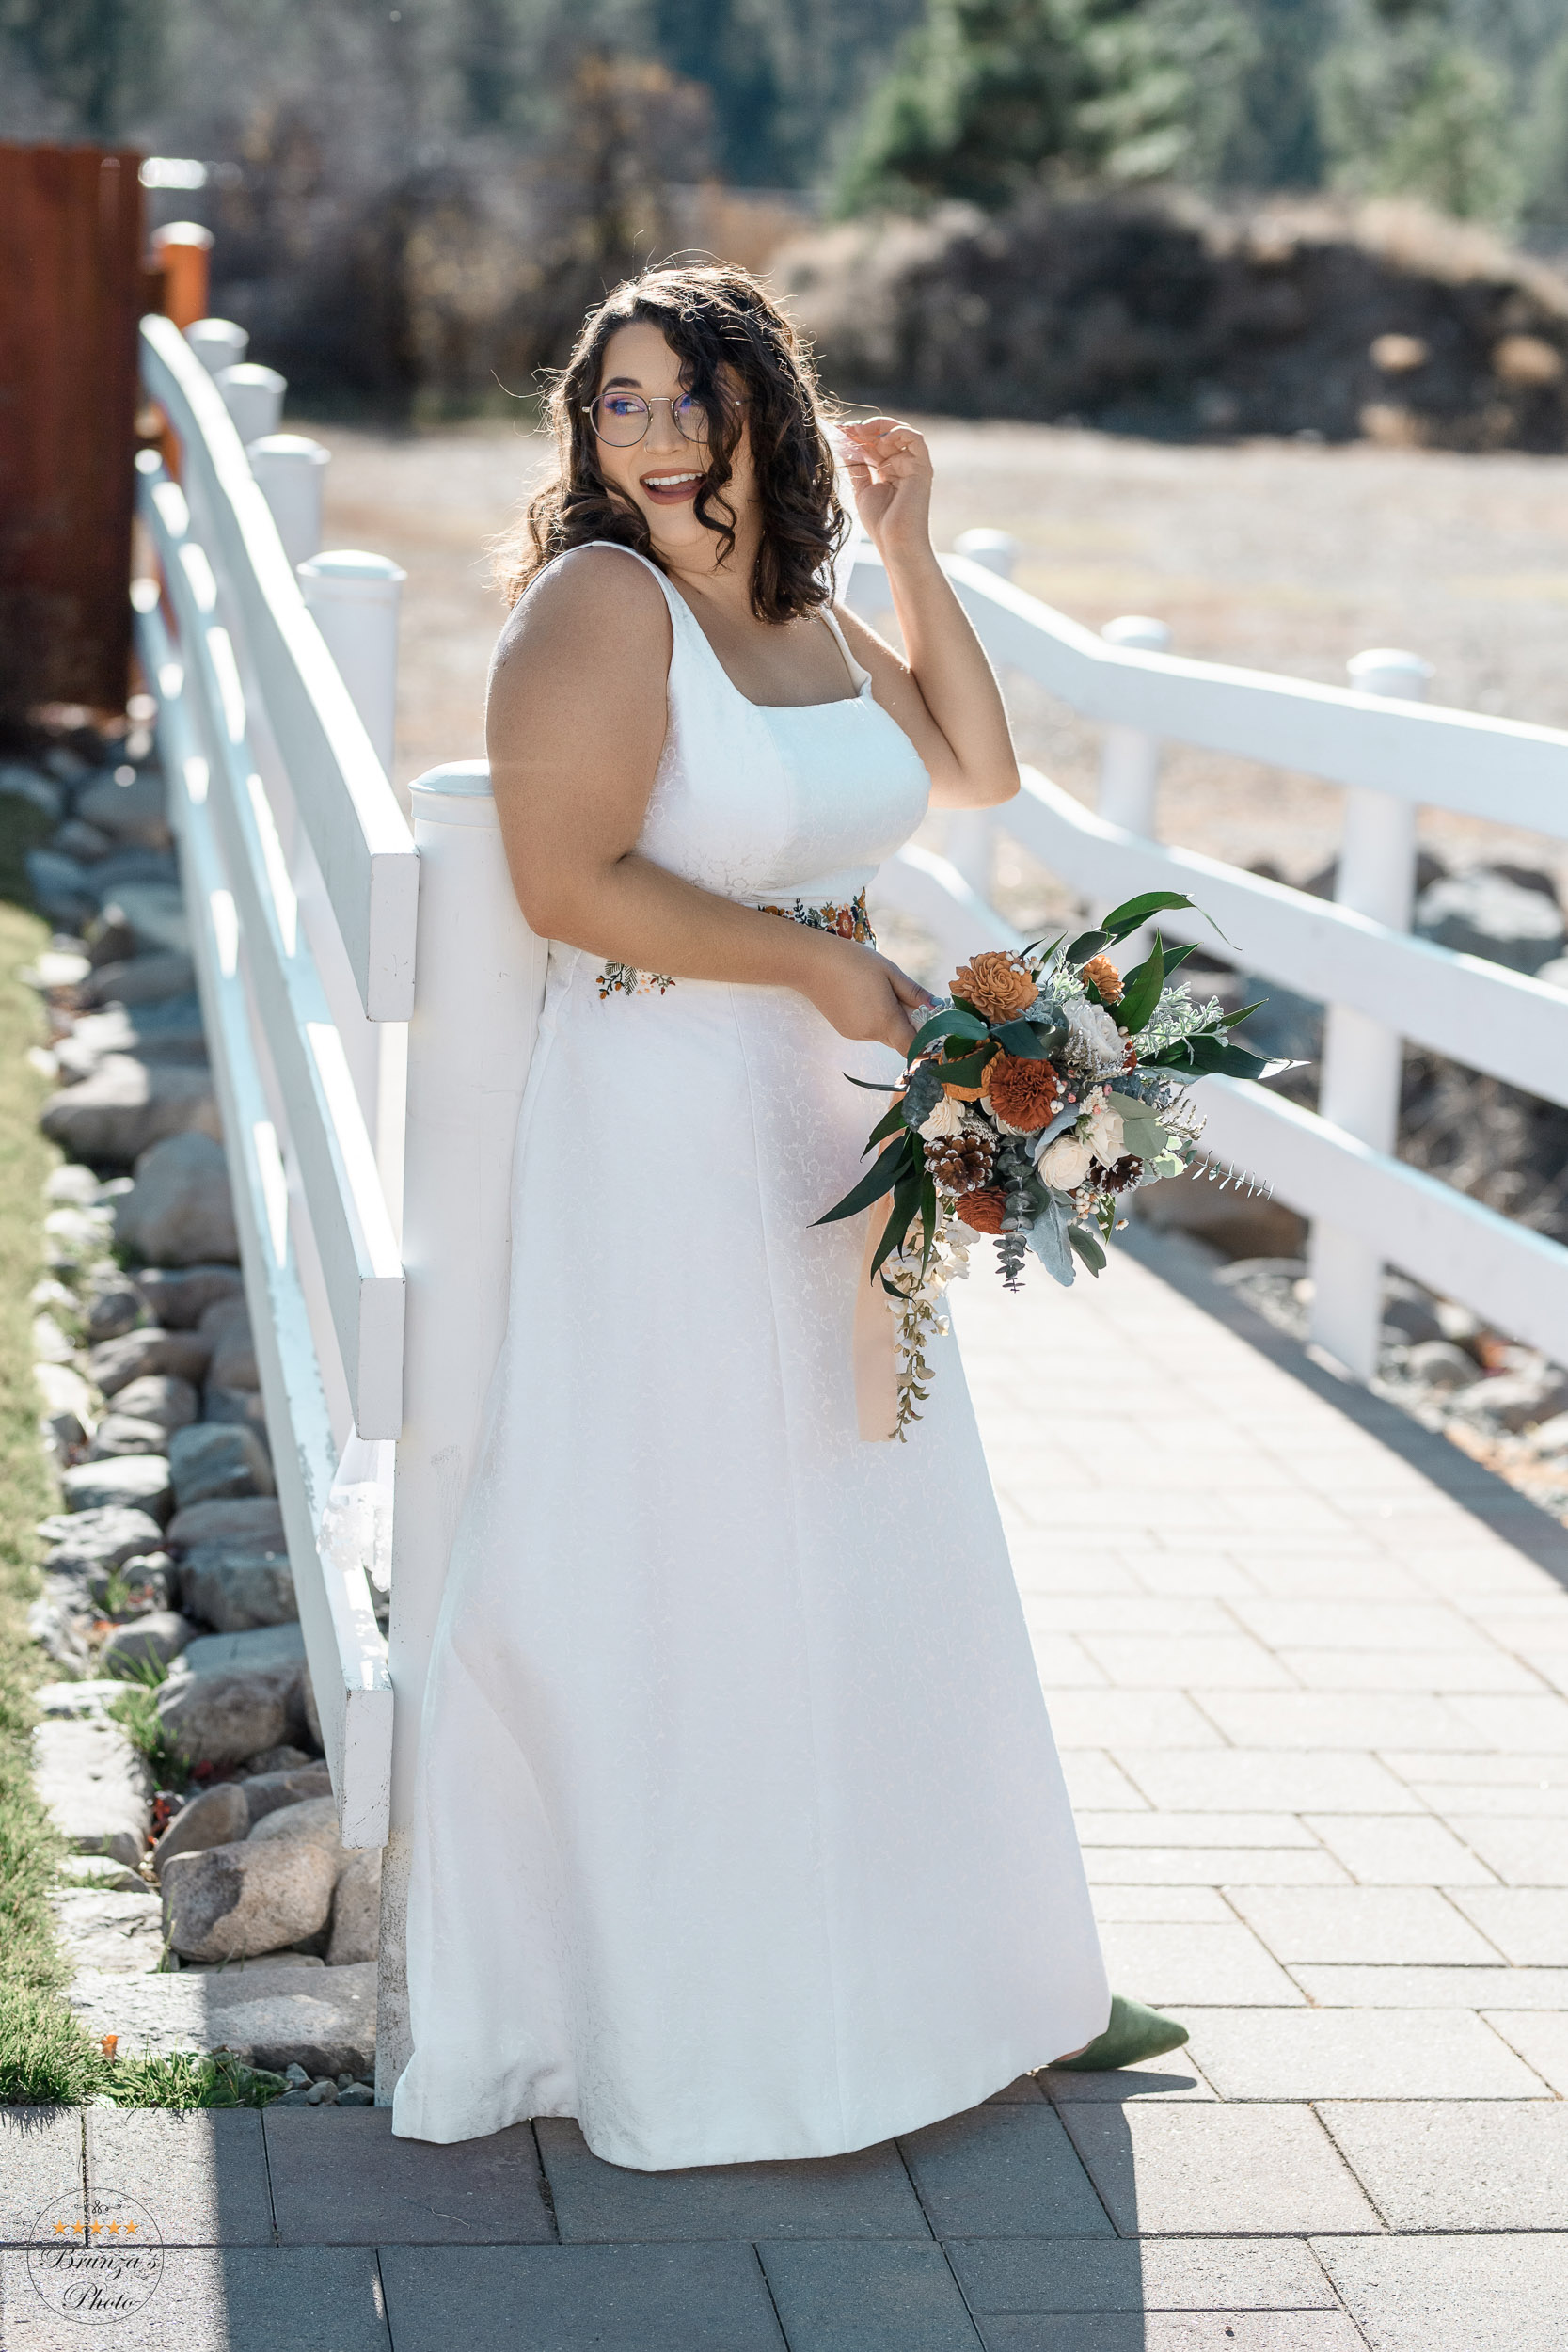 A bride in a white wedding dress standing on a wooden bridge.